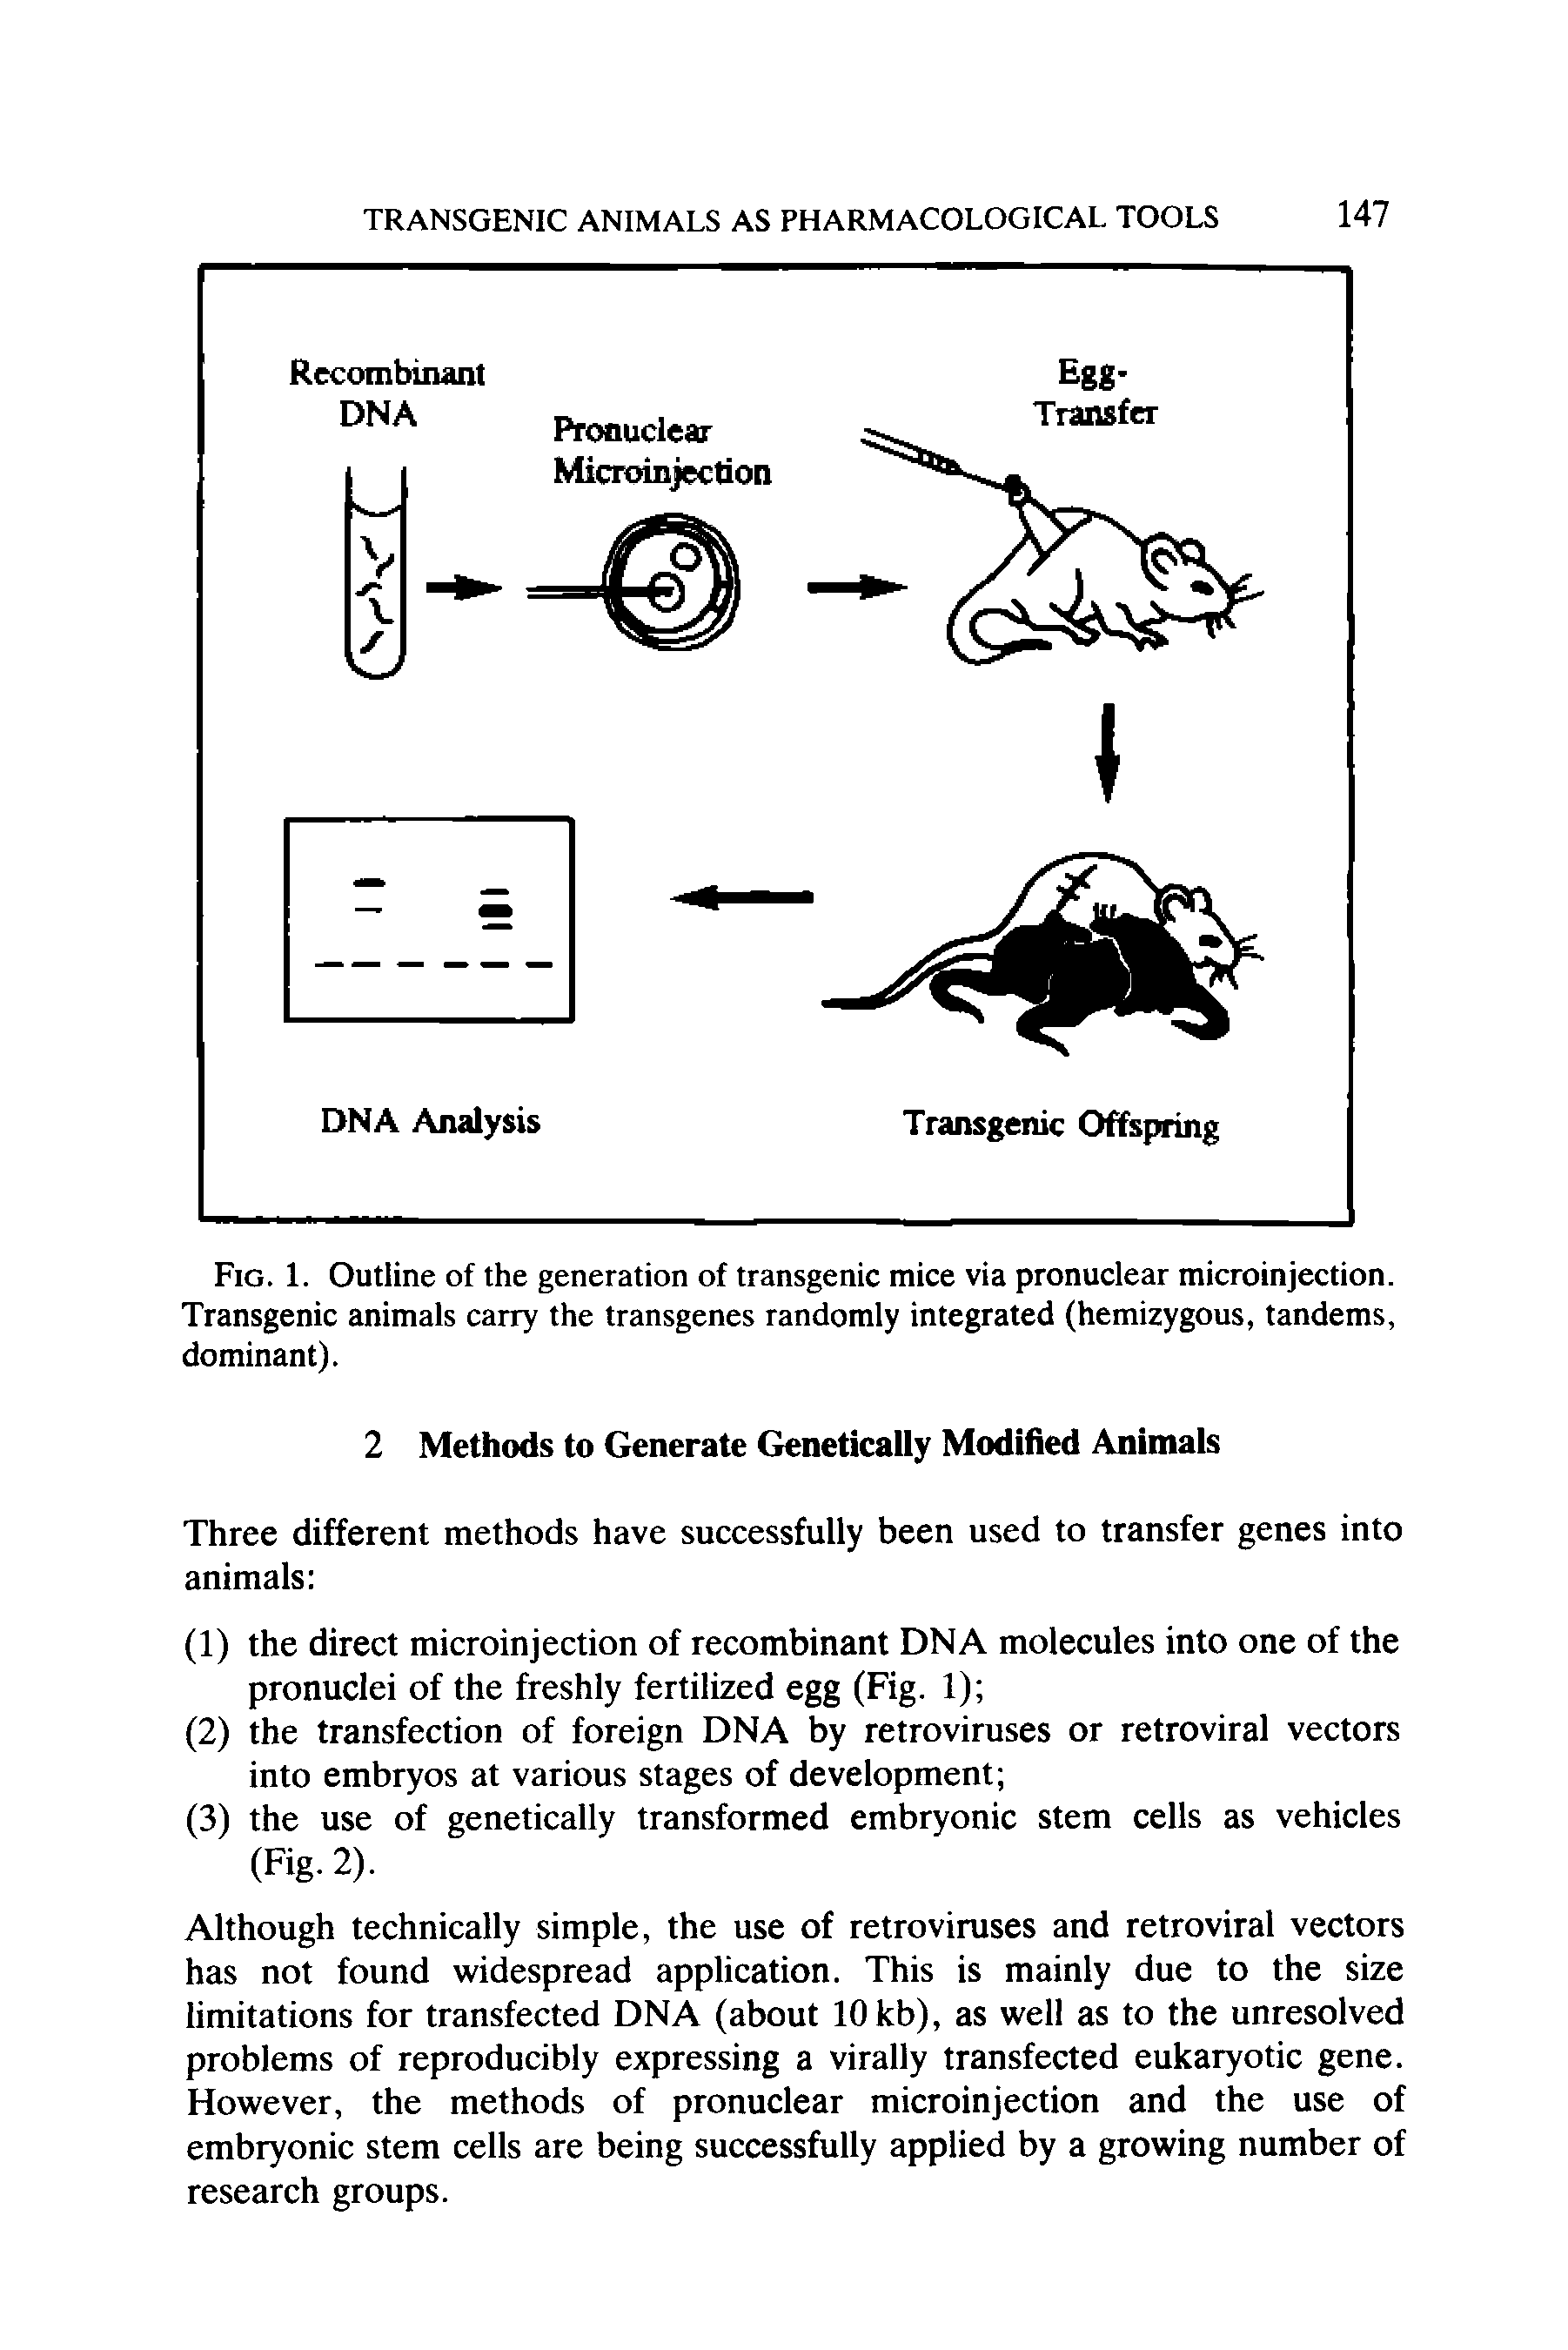 Fig. 1. Outline of the generation of transgenic mice via pronuclear microinjection. Transgenic animals carry the transgenes randomly integrated (hemizygous, tandems, dominant).